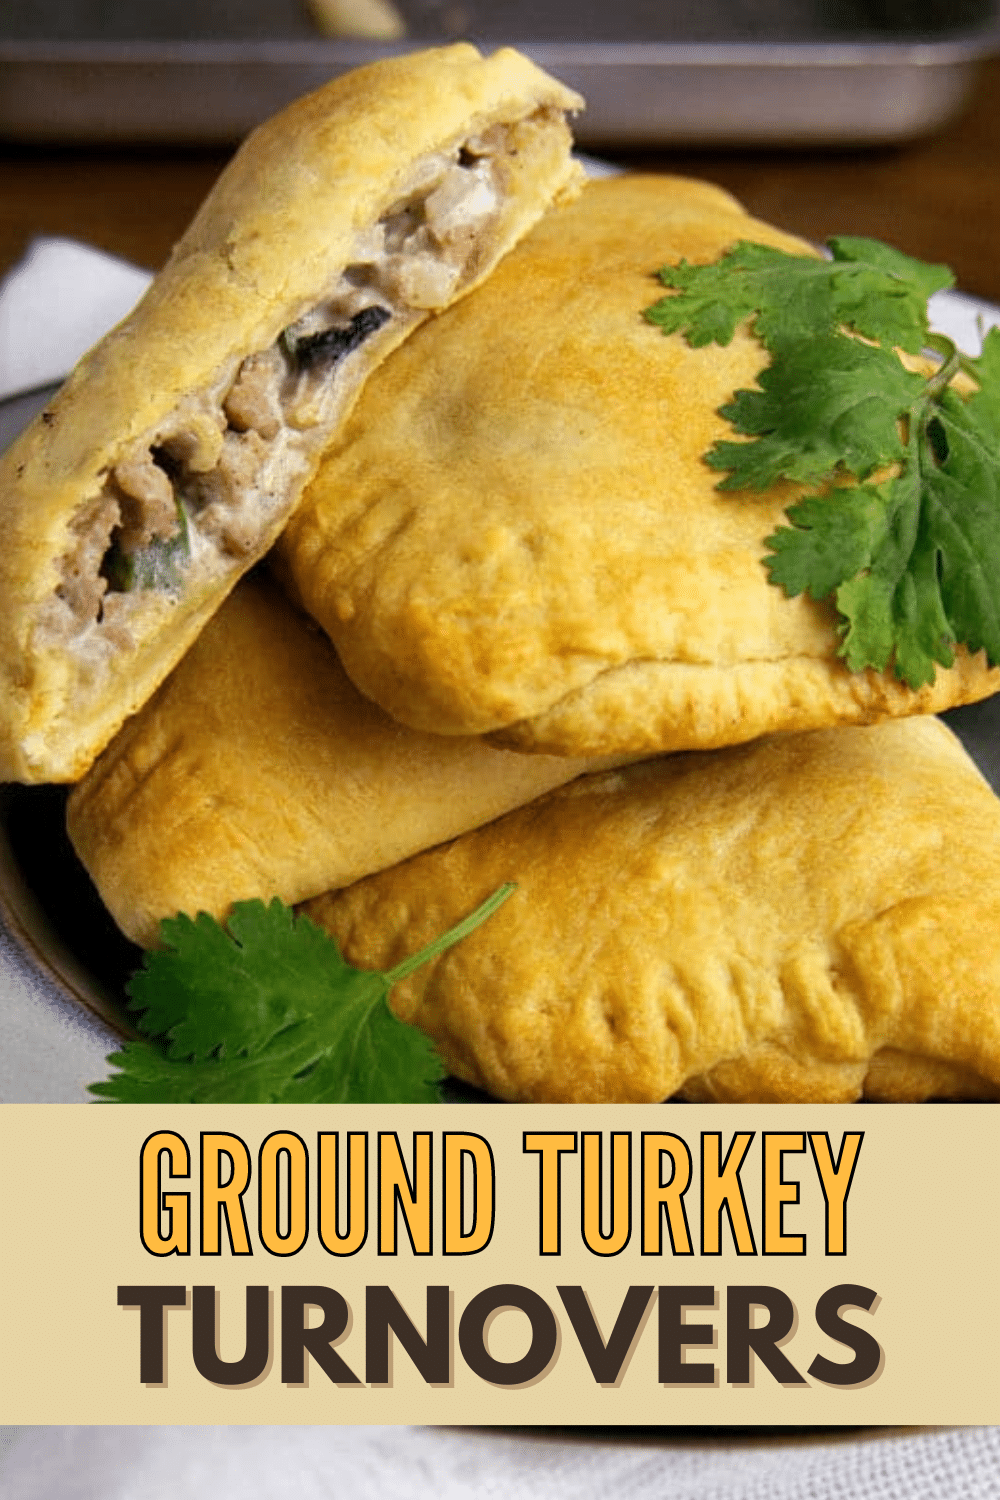 Ground turkey turnovers on a plate.